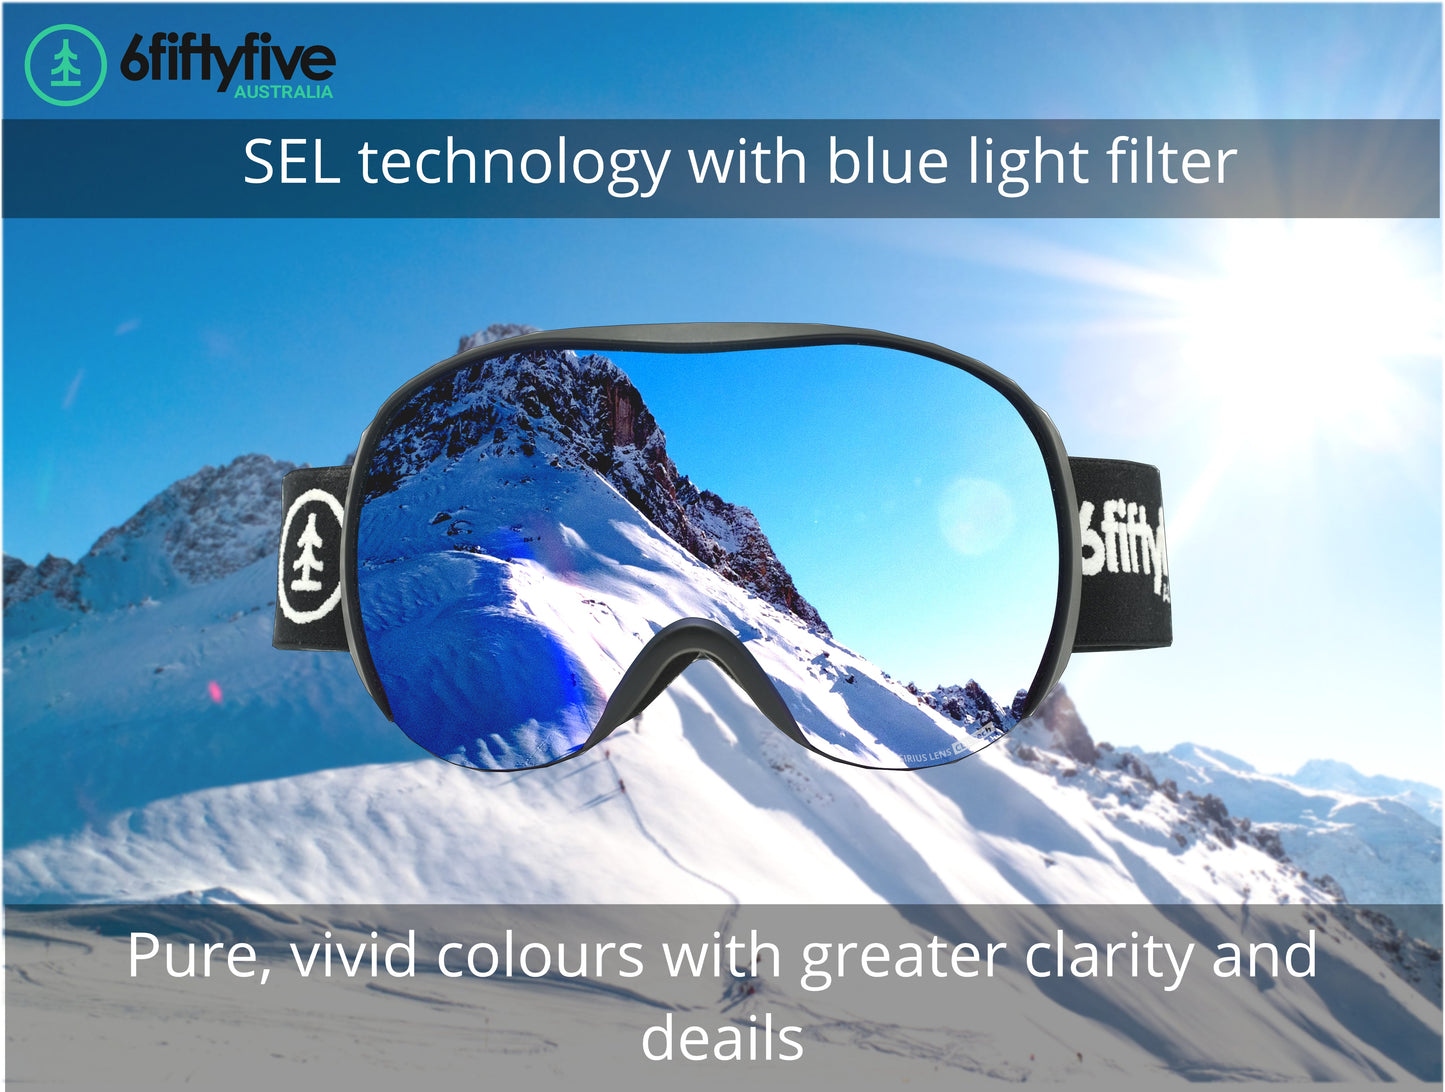 6fiftyfive - Sirius - frameless ski goggles for men and women - multilayer, Blue filter, Enhanced Contrast - full REVO - GOLD - 6fiftyfive